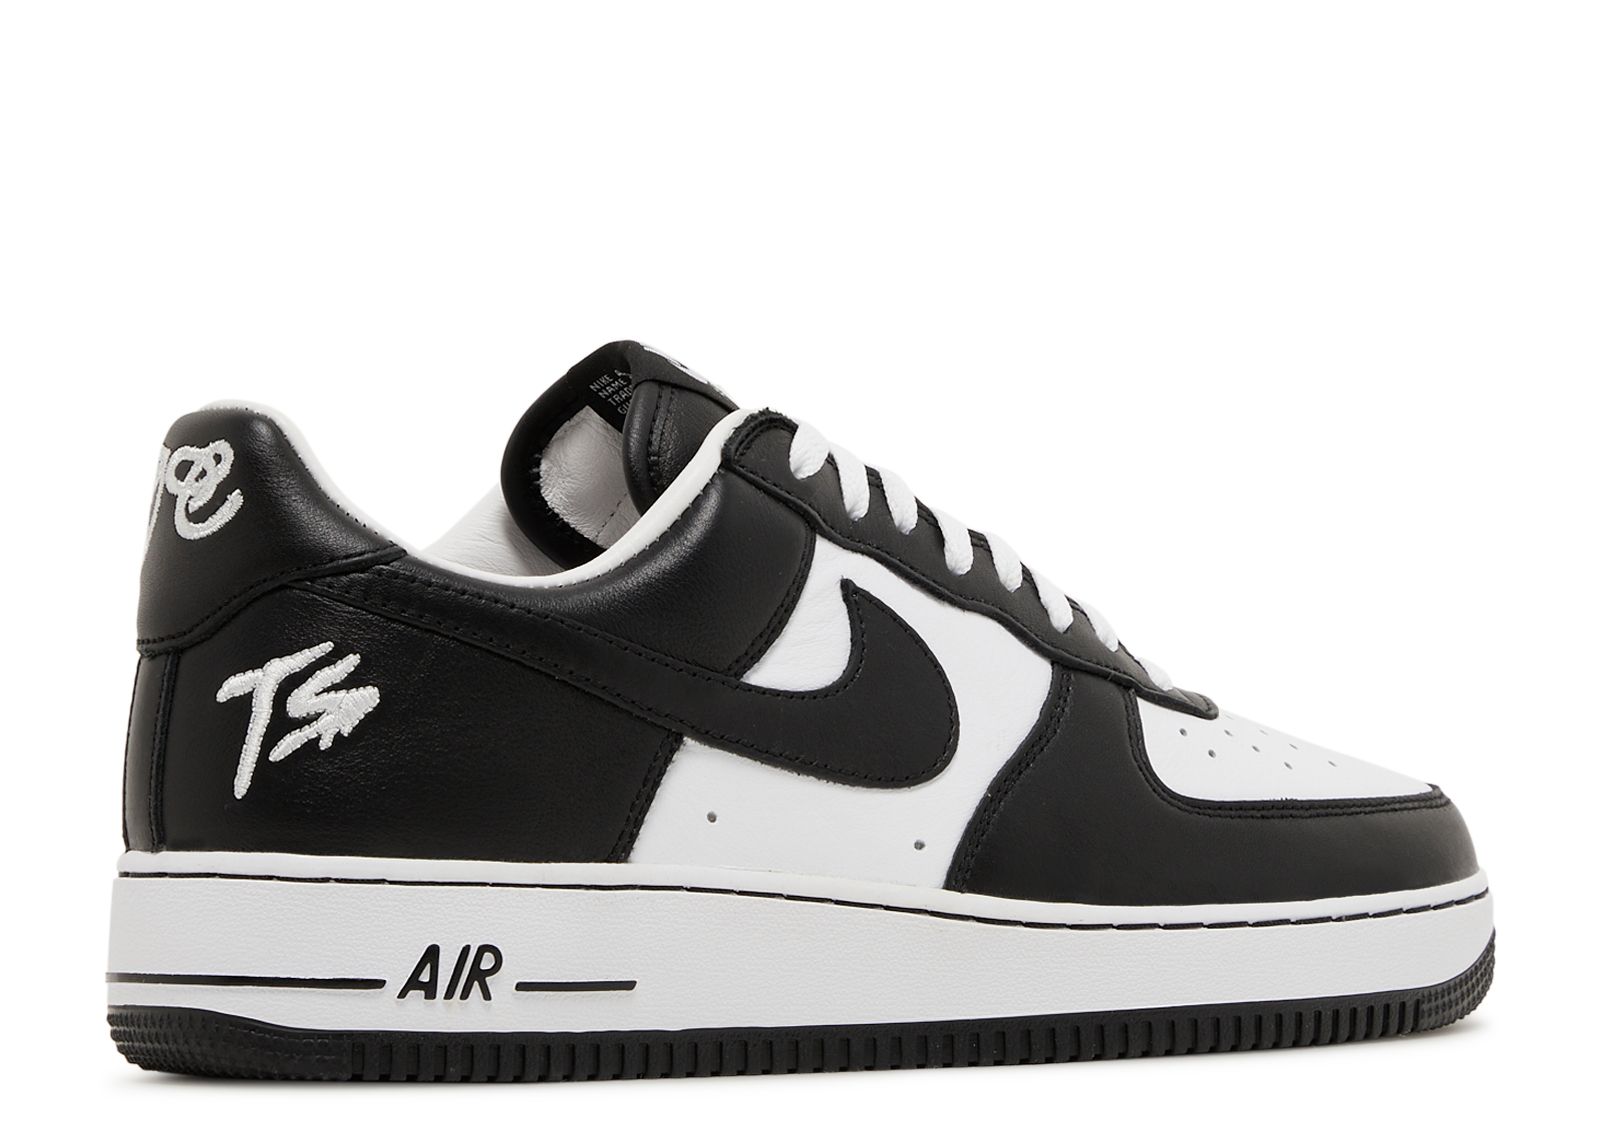 New 'Blackout' Terror Squad x Nike Air Force 1 Release Date